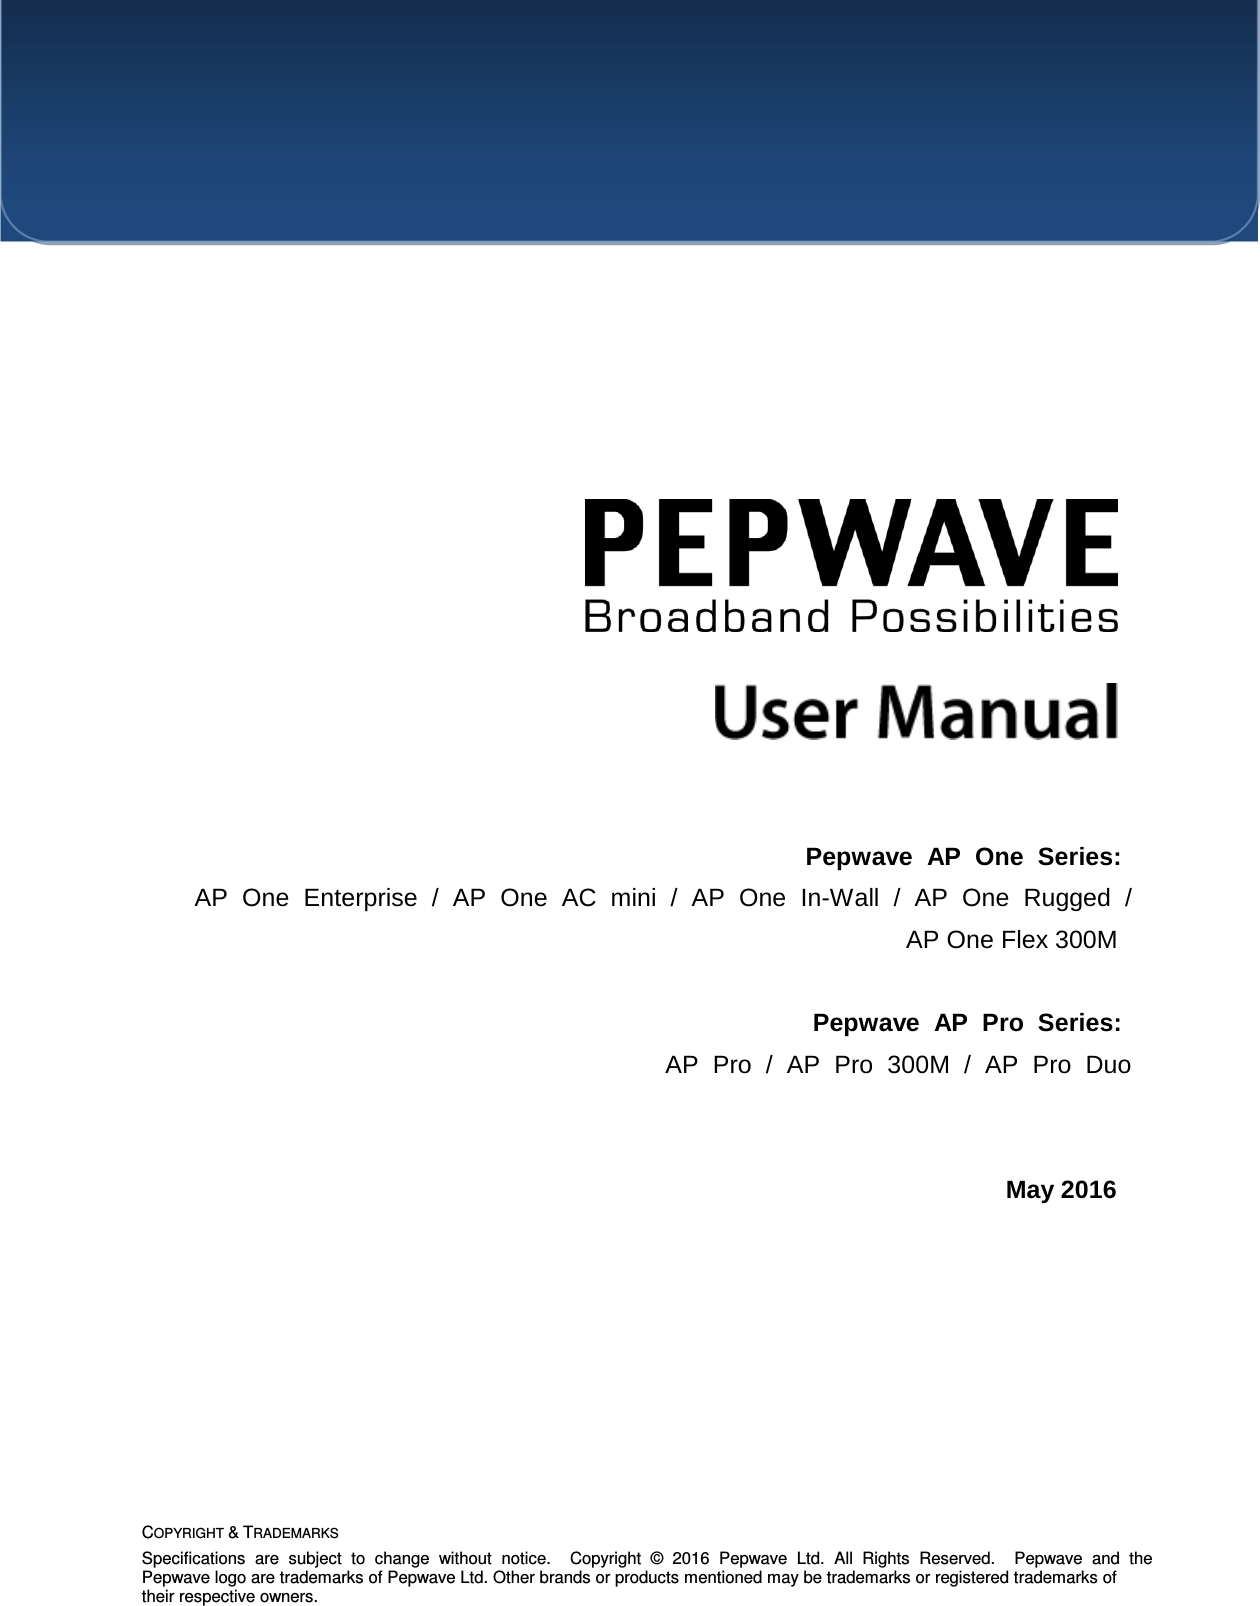 COPYRIGHT &amp; TRADEMARKS Specifications  are  subject  to  change  without  notice.    Copyright  ©  2016  Pepwave  Ltd.  All  Rights  Reserved.    Pepwave  and  the Pepwave logo are trademarks of Pepwave Ltd. Other brands or products mentioned may be trademarks or registered trademarks of their respective owners.            Pepwave  AP  One  Series: AP  One  Enterprise  /  AP  One  AC  mini  /  AP  One  In-Wall  /  AP  One  Rugged  /   AP One Flex 300M  Pepwave  AP  Pro  Series: AP  Pro  /  AP  Pro  300M  /  AP  Pro  Duo   May 2016 